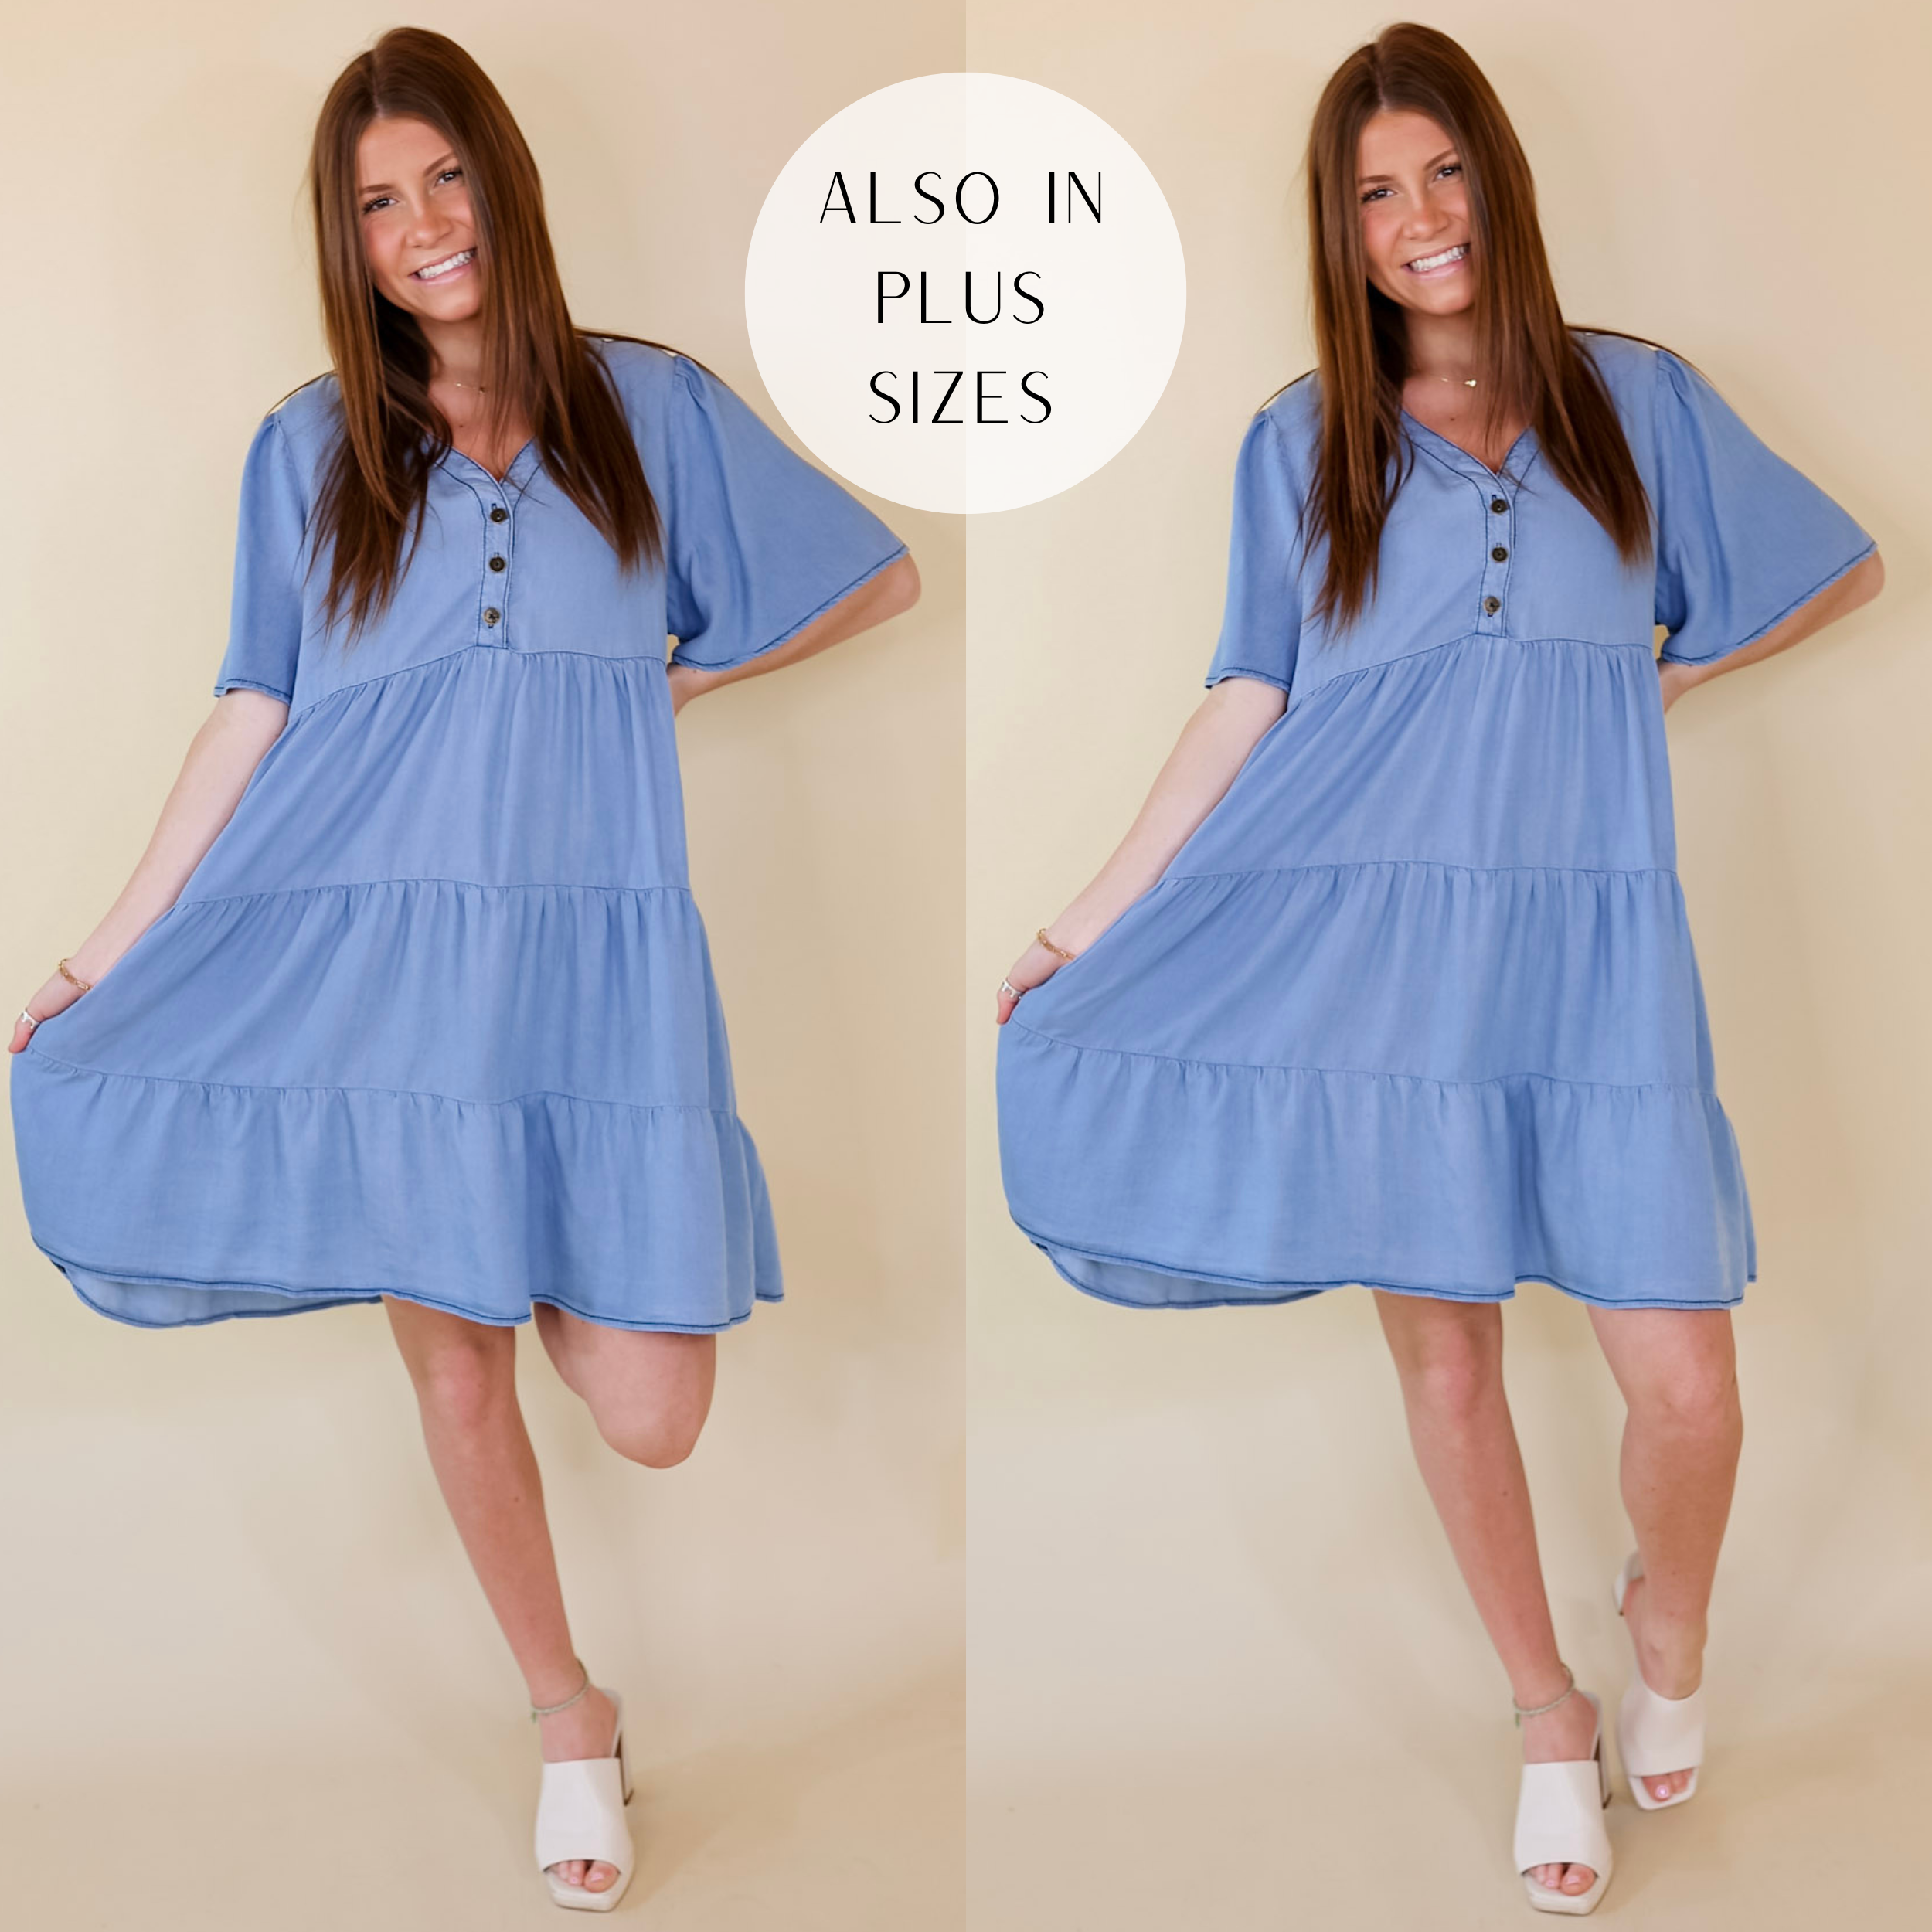 A light wash short sleeve dress with buttons, a V neckline, tiered skirt, flowy sleeves, and a relaxed fit. Item is pictured on a pale pink background.